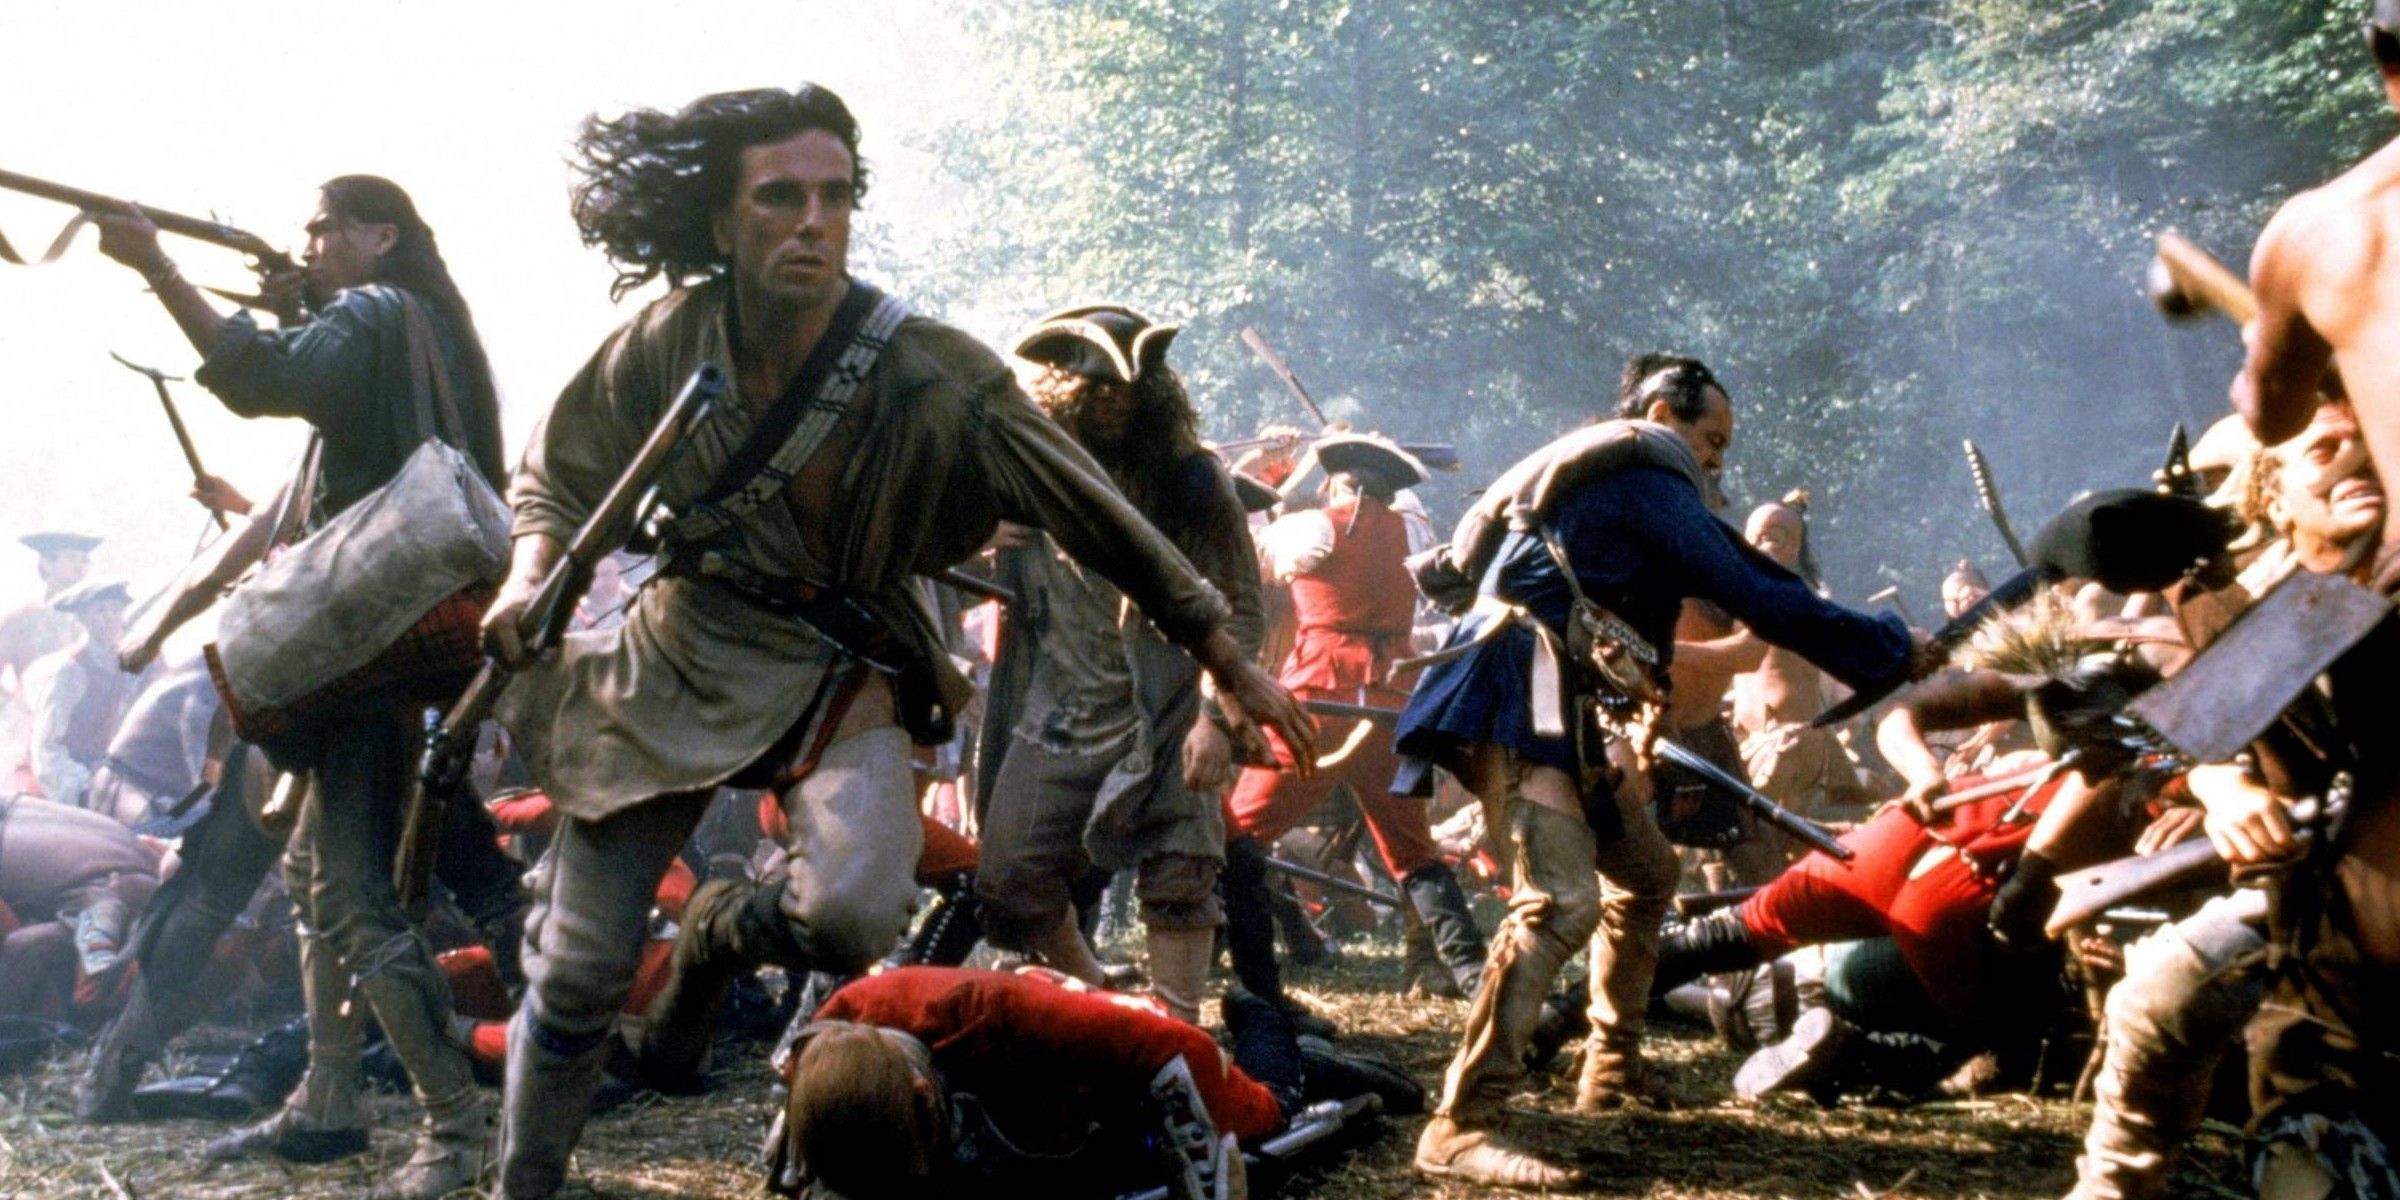 Daniel Day-Lewis charging into battle in The Last of the Mohicans